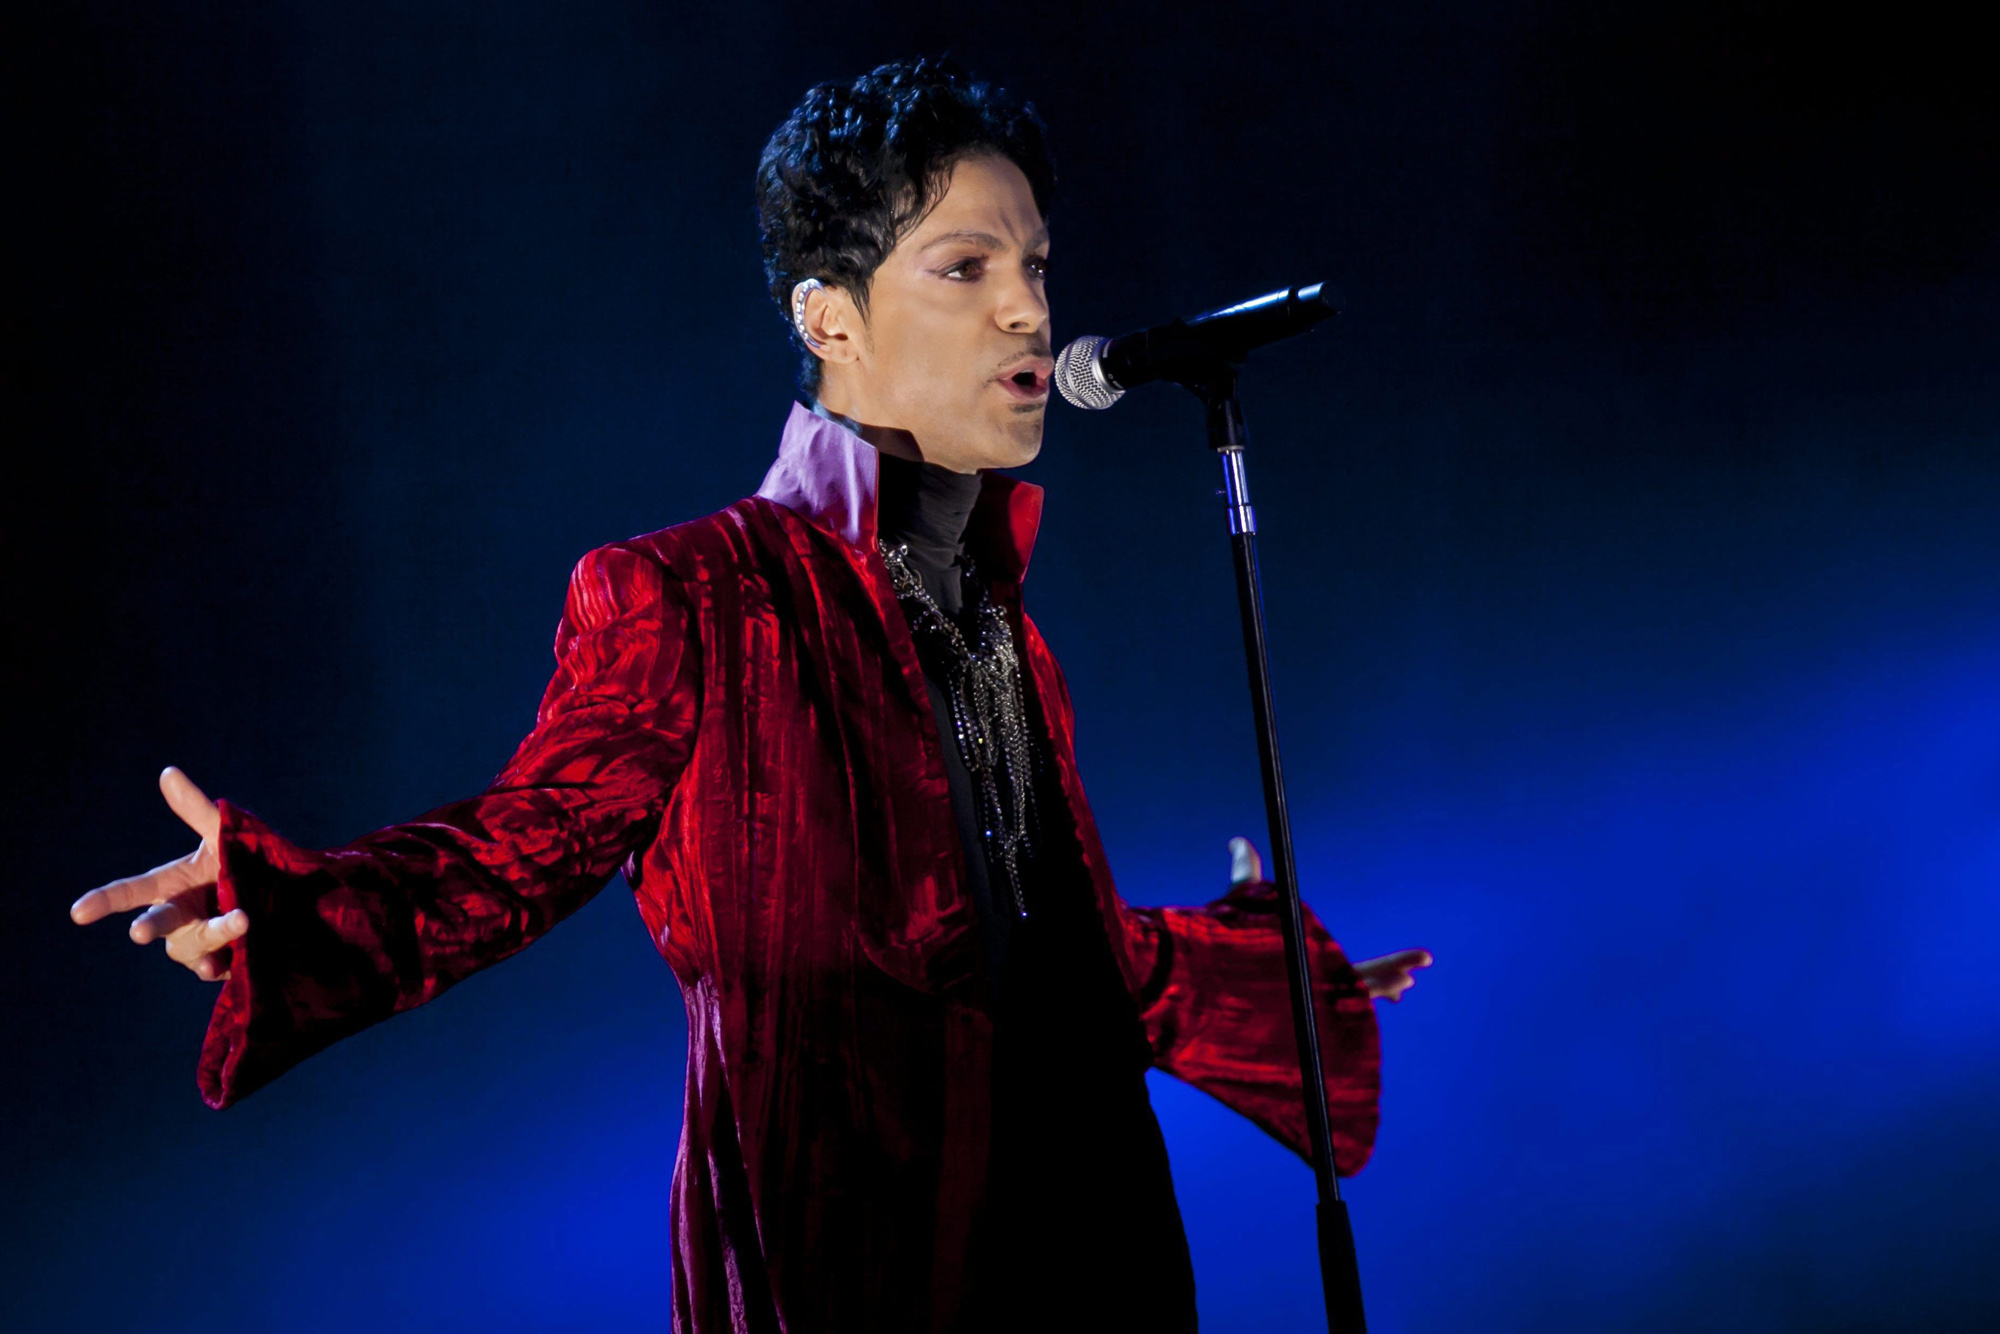 FILE - In this Aug. 9, 2011 file photo, U.S. musician Prince performs during his concert at the Sziget Festival on the Shipyard Island, northern Budapest, Hungary. The enigmatic star flew into London on Tuesday, Feb. 4, 2014, at the start of a still-evolving string of dates in support of forthcoming album "Plectrum Electrum," recorded with all-female trio 3RDEYEGIRL. (AP Photo/MTI, Balazs Mohai, File) HUNGARY OUT